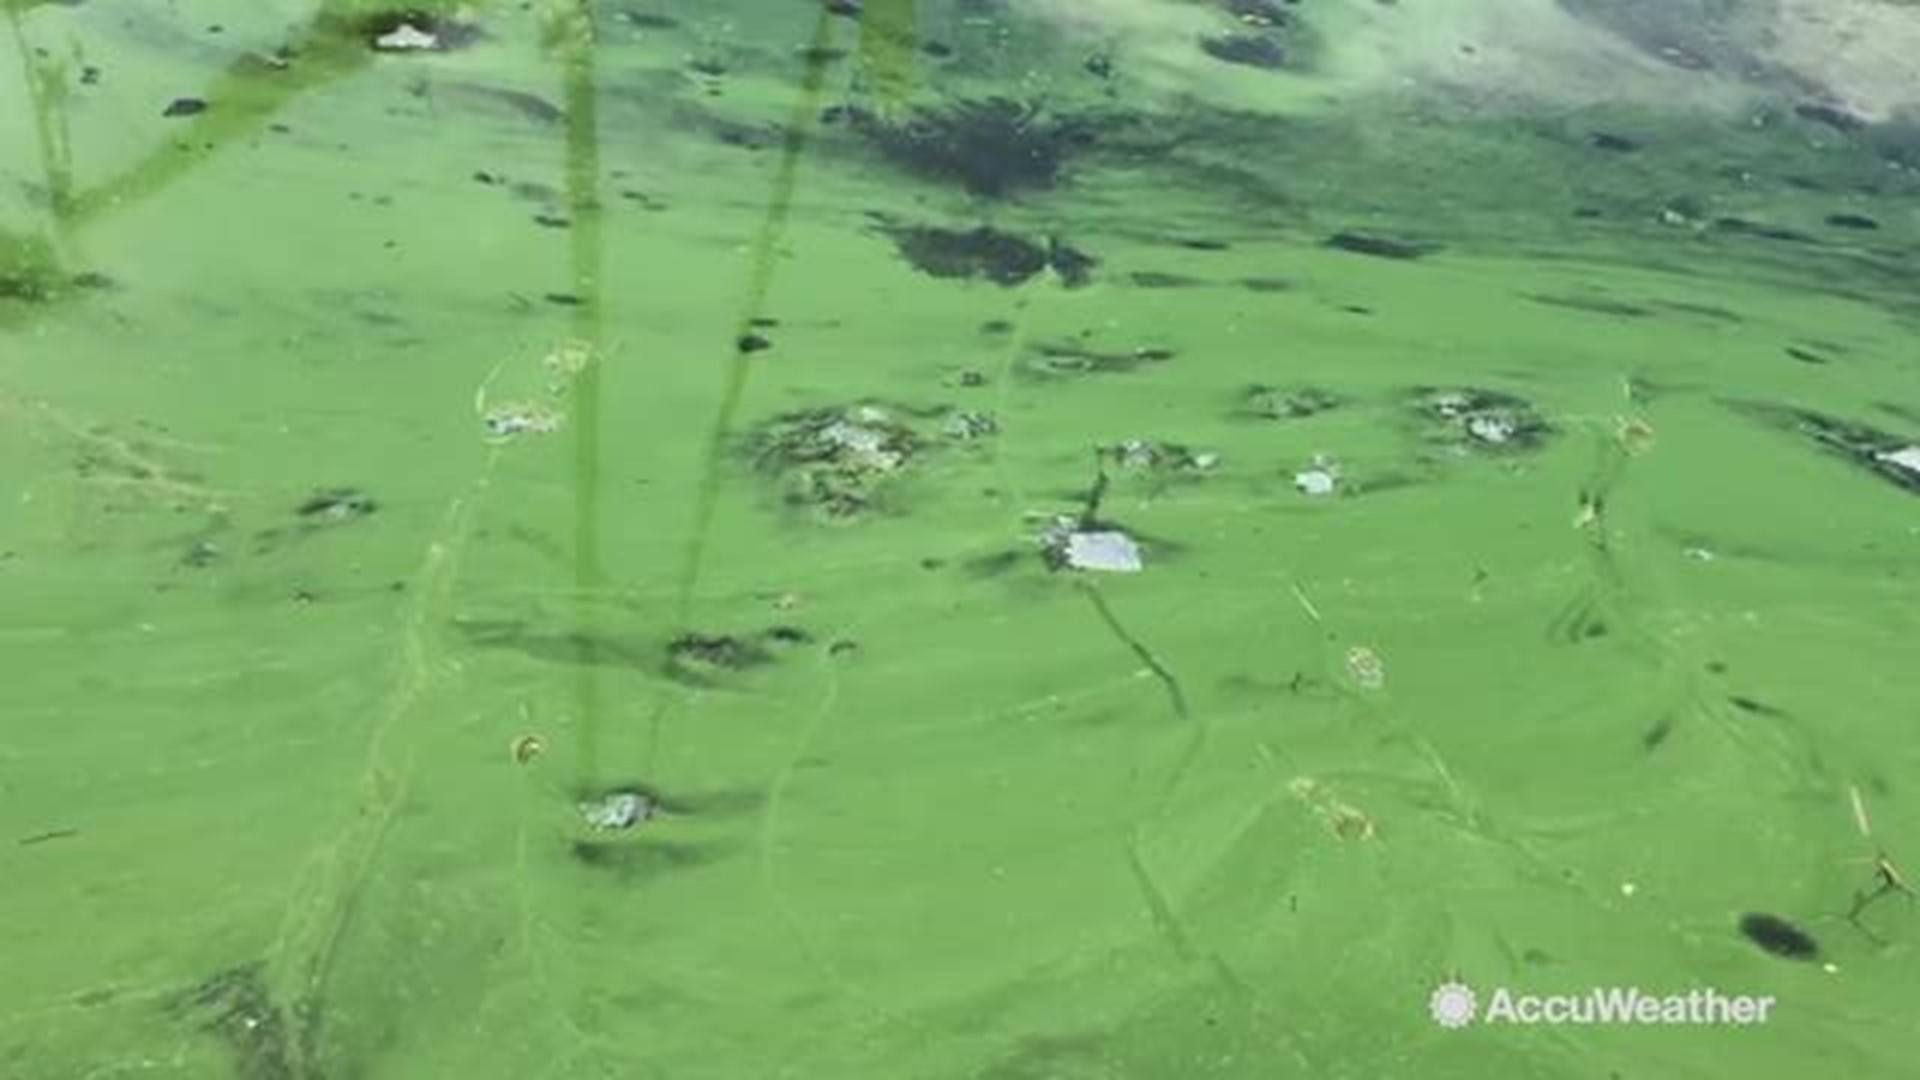 Harmful algal blooms seem more and more common. How do these large blooms form, and what health risks do they pose to humans and other animals?